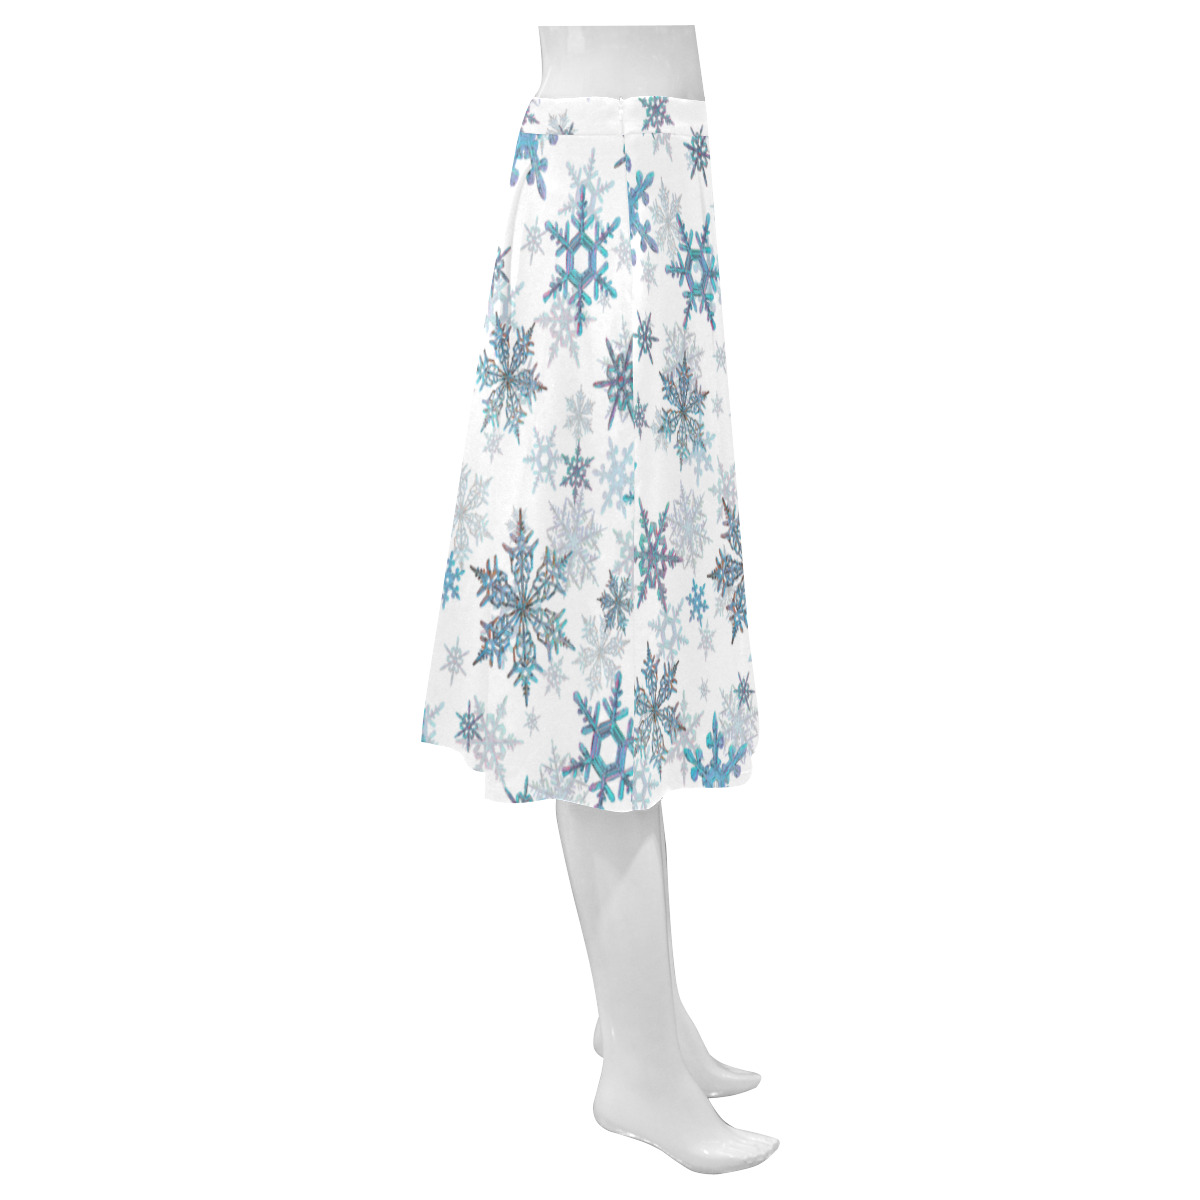 Snowflakes, Blue snow, stitched Mnemosyne Women's Crepe Skirt (Model D16)